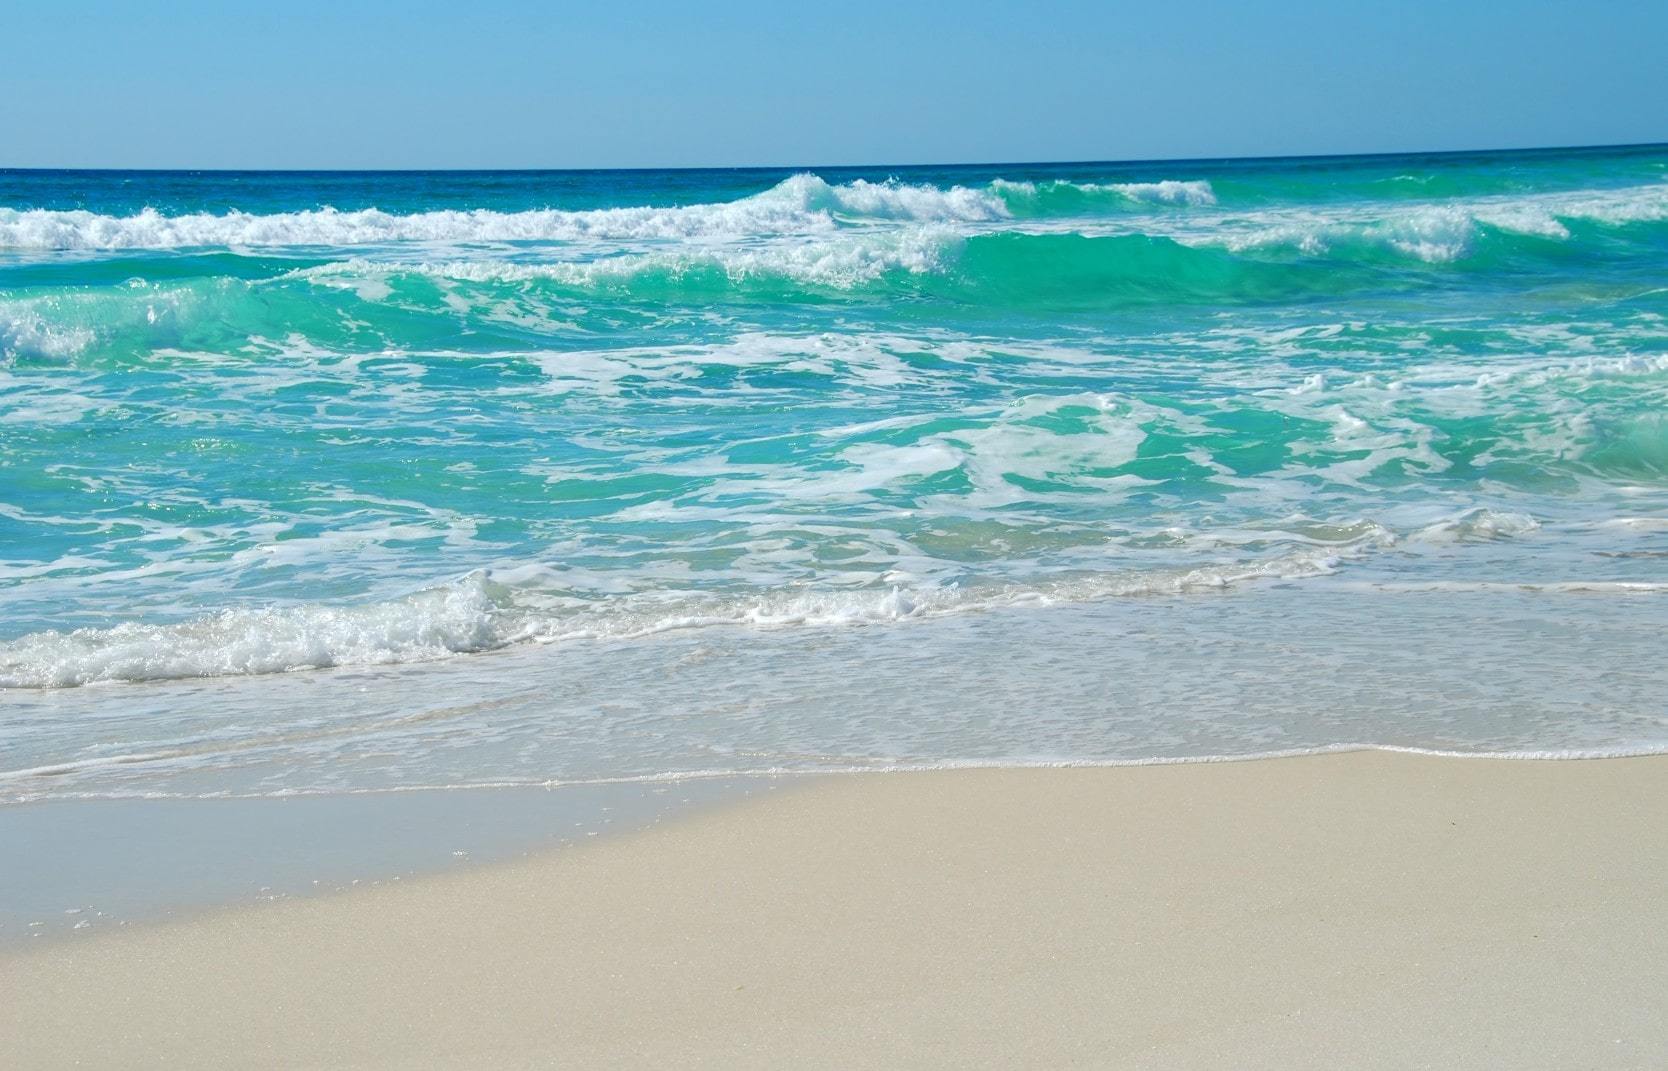 Turquoise water with waves on a white sand beach on Florida's Gulf Coast